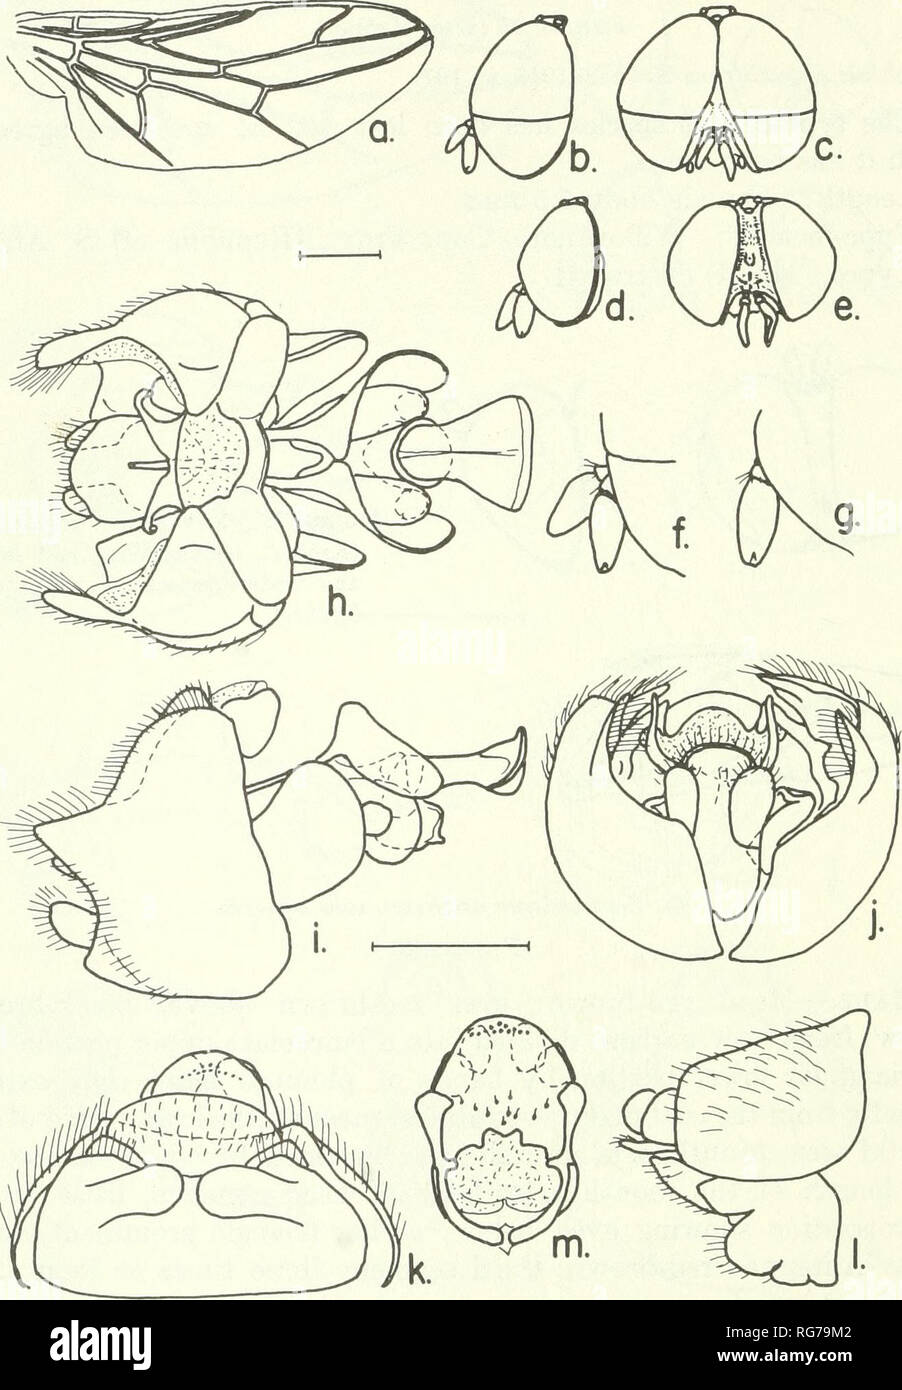 . Bulletin - United States National Museum. Science. 52 U.S. NATIONAL MUSEUM BULLETIN 277. Figure 26.—Scenopinus anthrax, new species, male, female: a, wing; b, c, male head, lateral and frontal aspects; d, e, female head, lateral and frontal aspects;/, g, enlarged details of male and female antennae; h-j, ventral, lateral and posterior aspects of male ter- minalia; k, ventral aspect of female 8th sternum; /, lateral aspect of female 8th and 9th segments; v, female 9th sternum and bursa. Female.—Head red-brown, eyes red-brown. Frons only as wide as ocellar tubercle, punctured with a shallow m Stock Photo